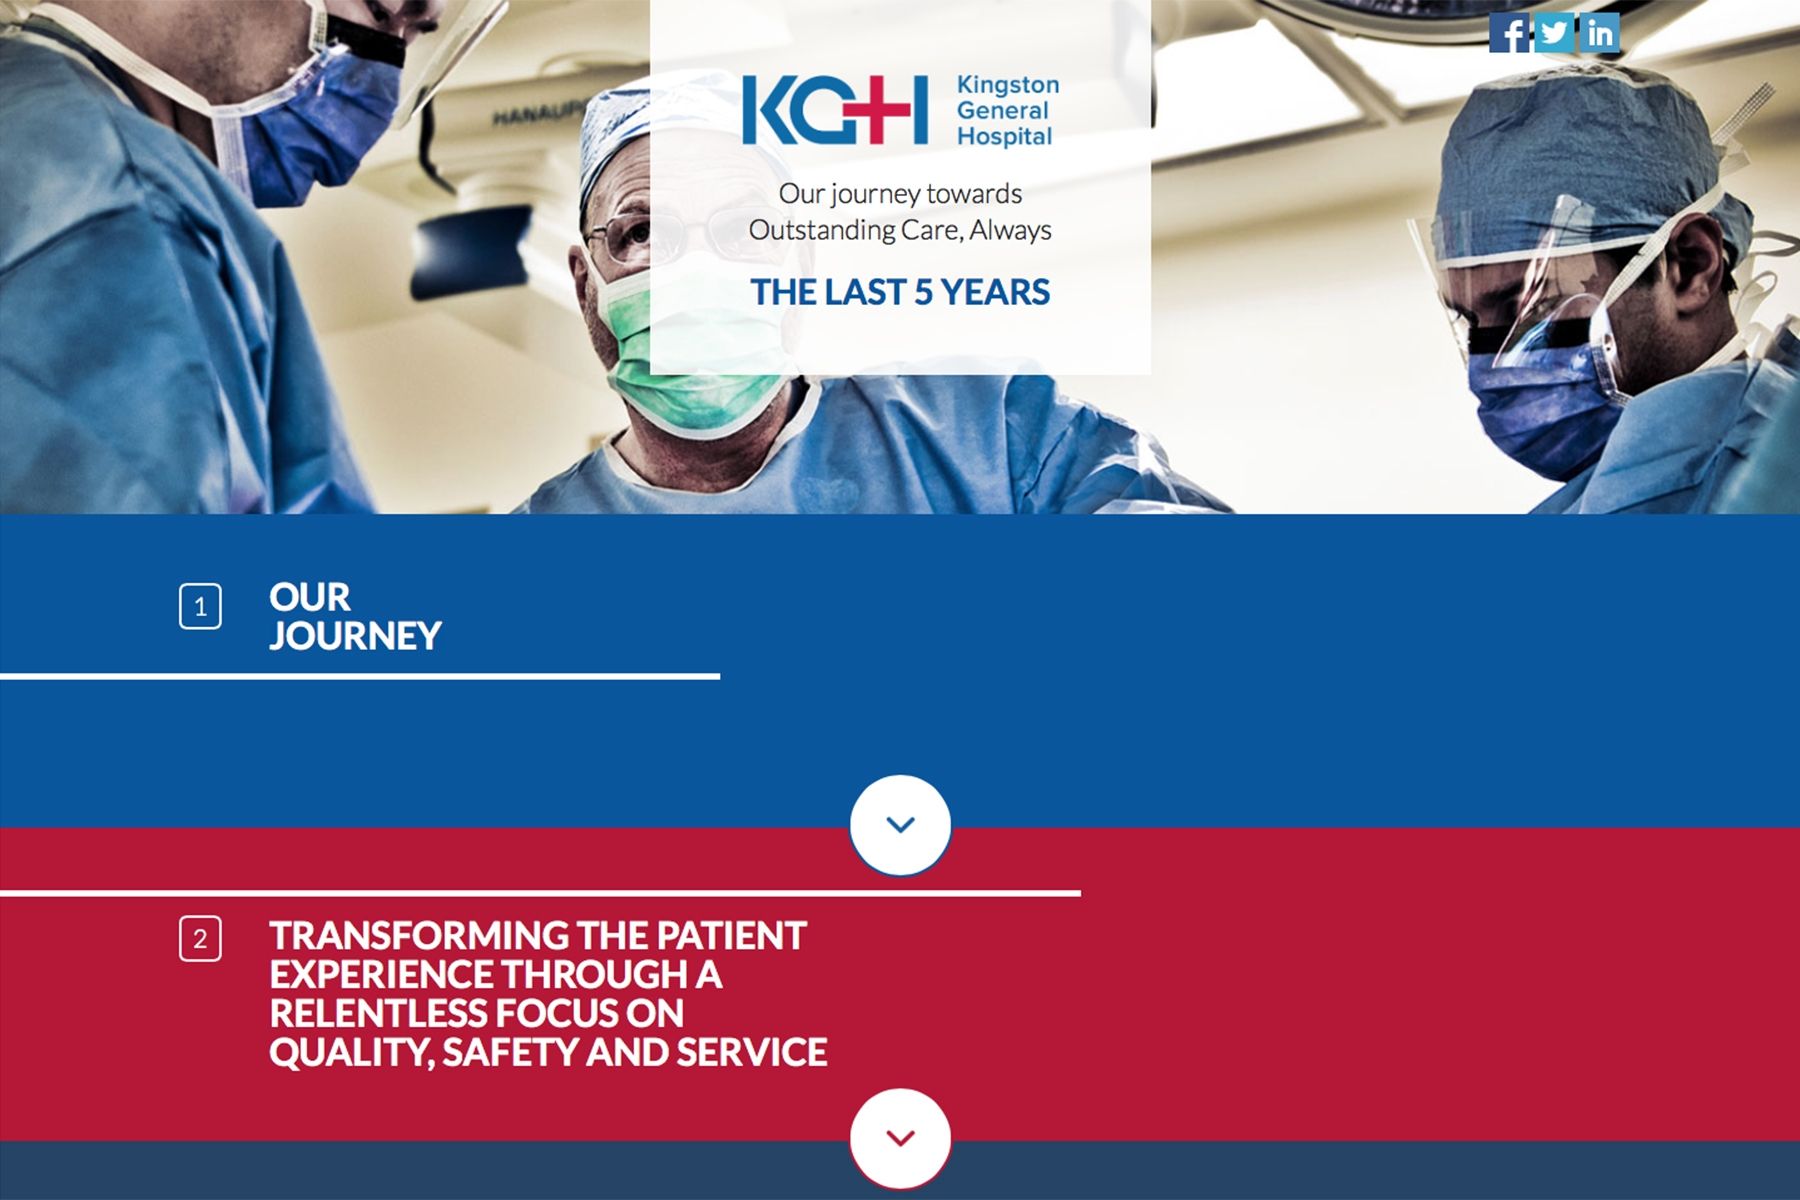 Be sure to get the full story and check out the KGH journey online at kghConnect.ca/kgh-journey .